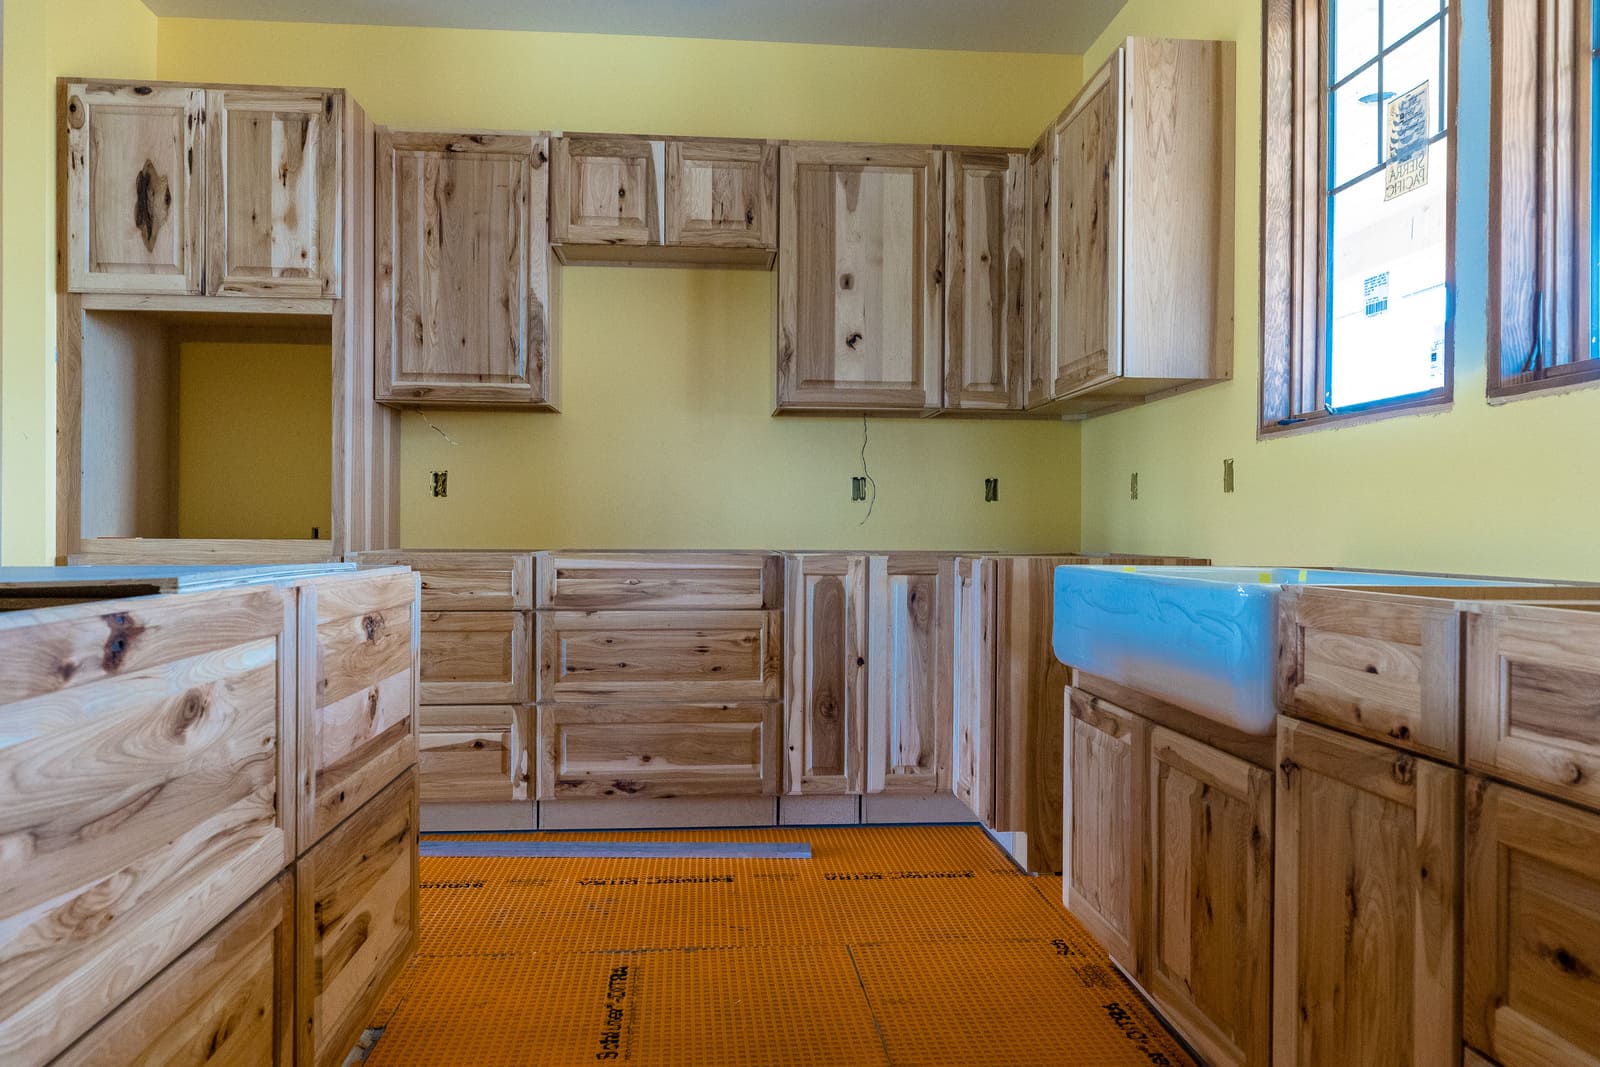 Custom pine wood kitchen cabinetry with sink installed